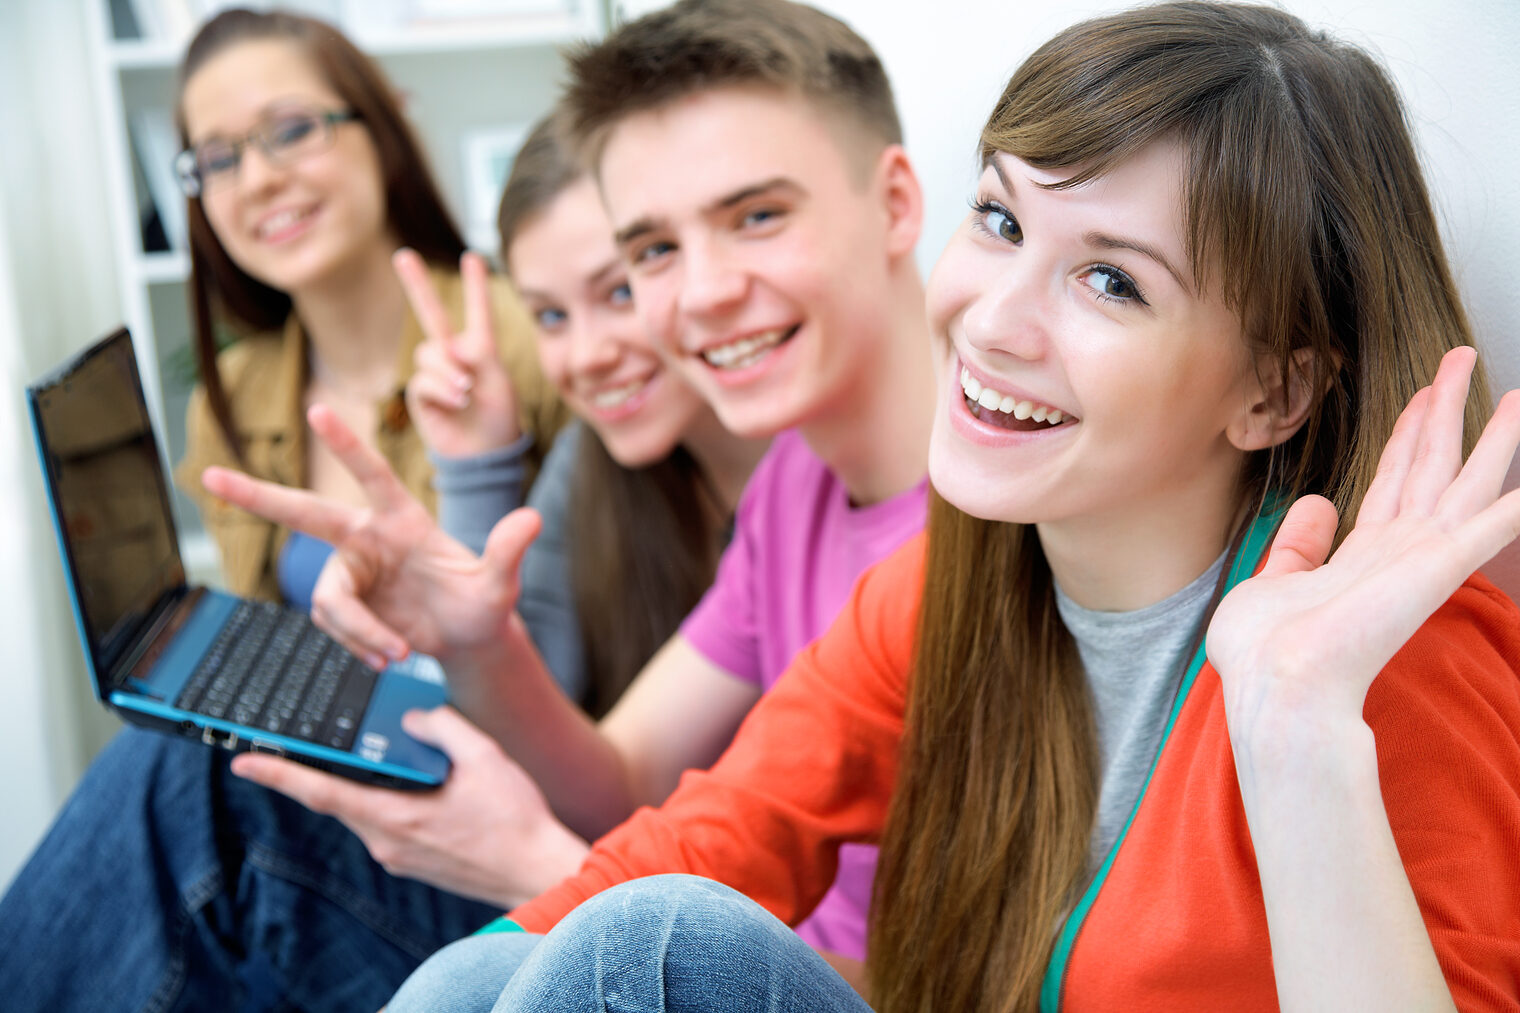 Close-up of four teenagers laughing and gesturing at camera Schlagwort(e): teens, student, education, teenager, college, friendship, people, looking, smile, smiling, years, school, young, male, happiness, youth, portrait, toothy, cheerful, female, casual, happy, group, camera, woman, secondary, caucasian, fun, laughing, studying, adult, cute, together, friends, expression, girl, carefree, man, enjoyment, boy, child, textbook, 18-19, person, couple, joy, positive, refreshment, gesture